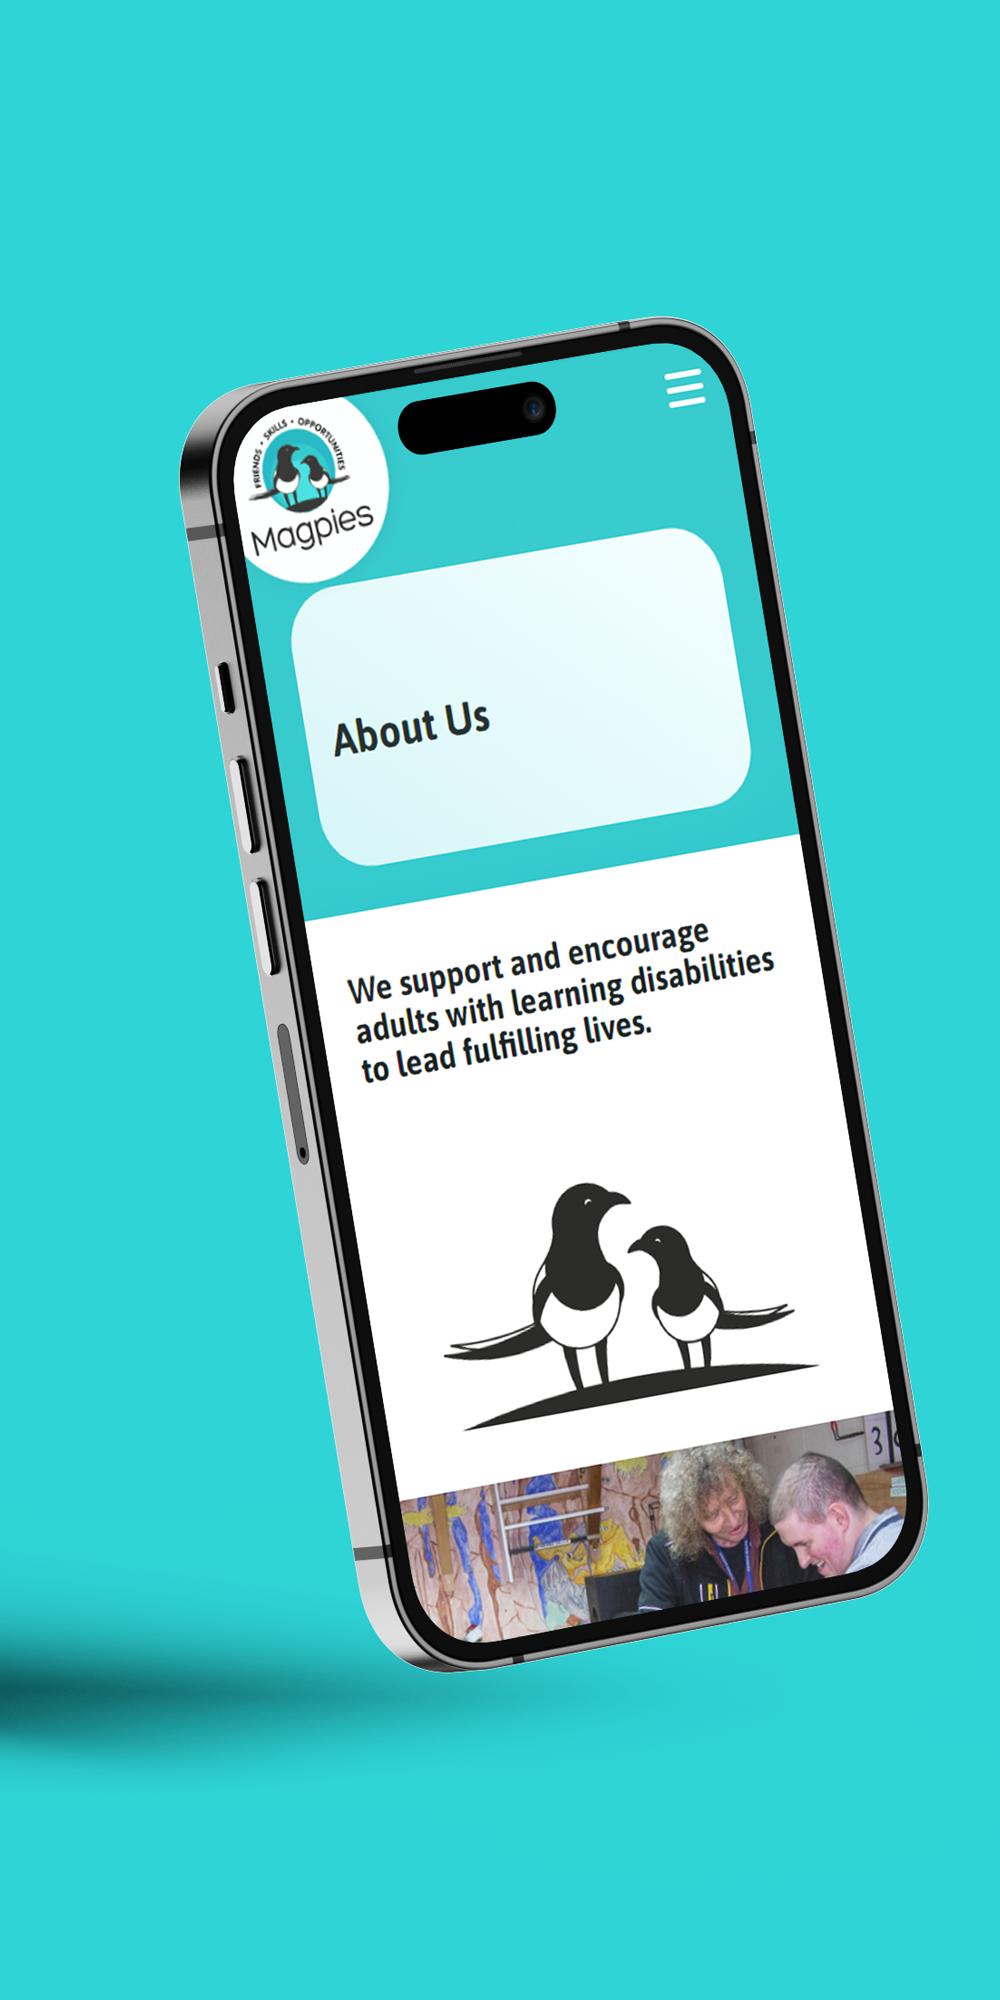 Magpies About us page shown on a phone screen